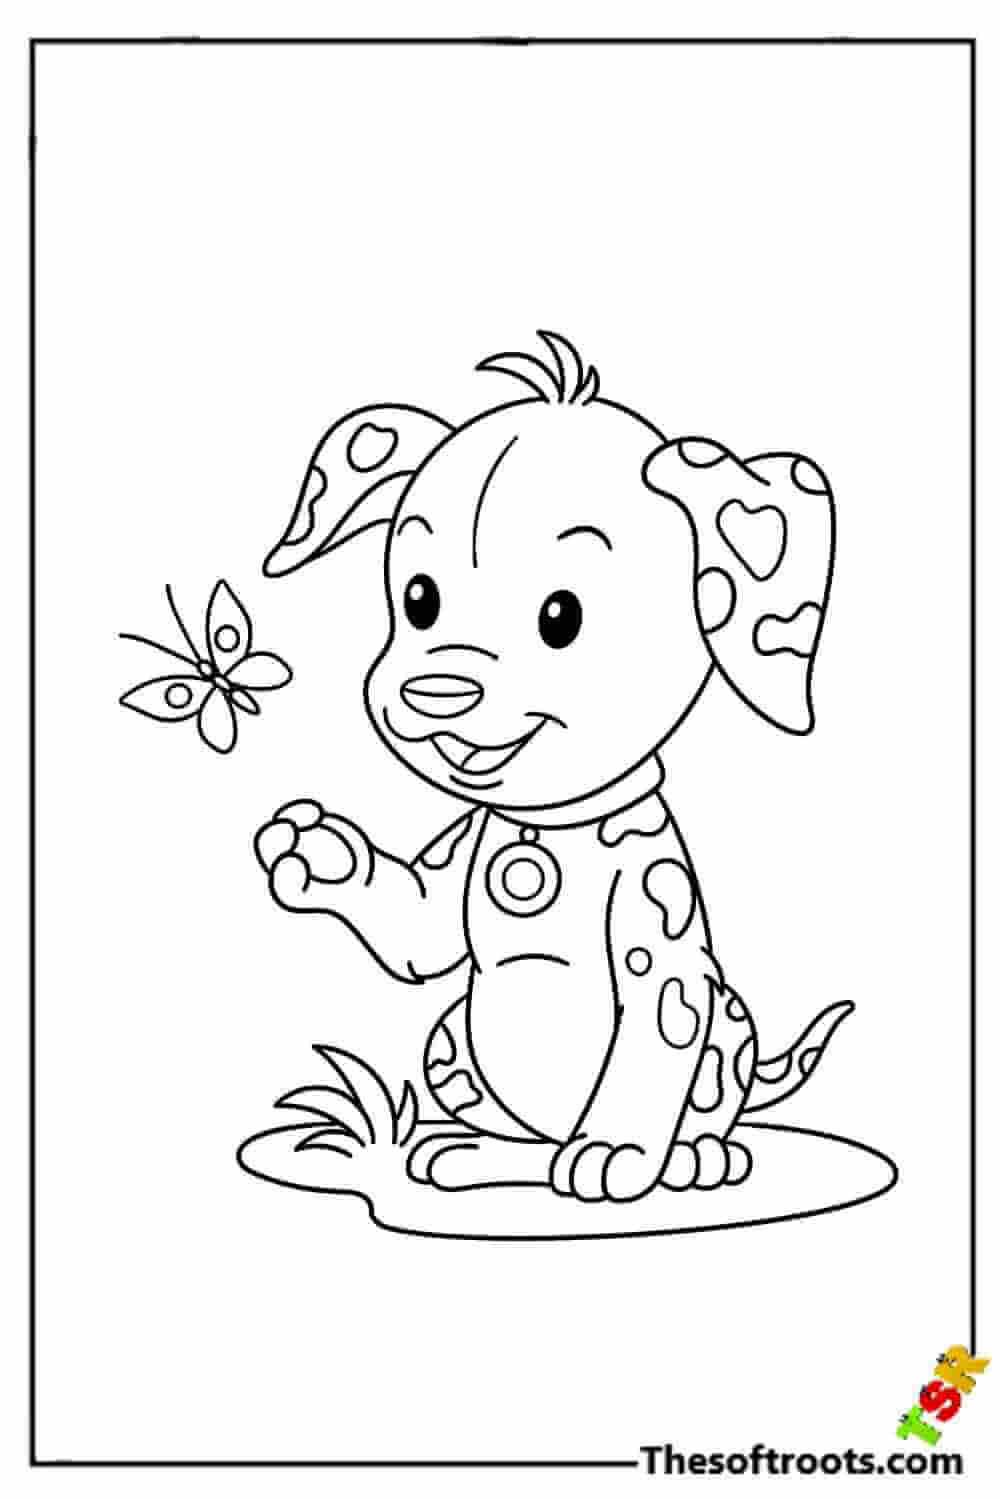 Baby puppy to print coloring pages